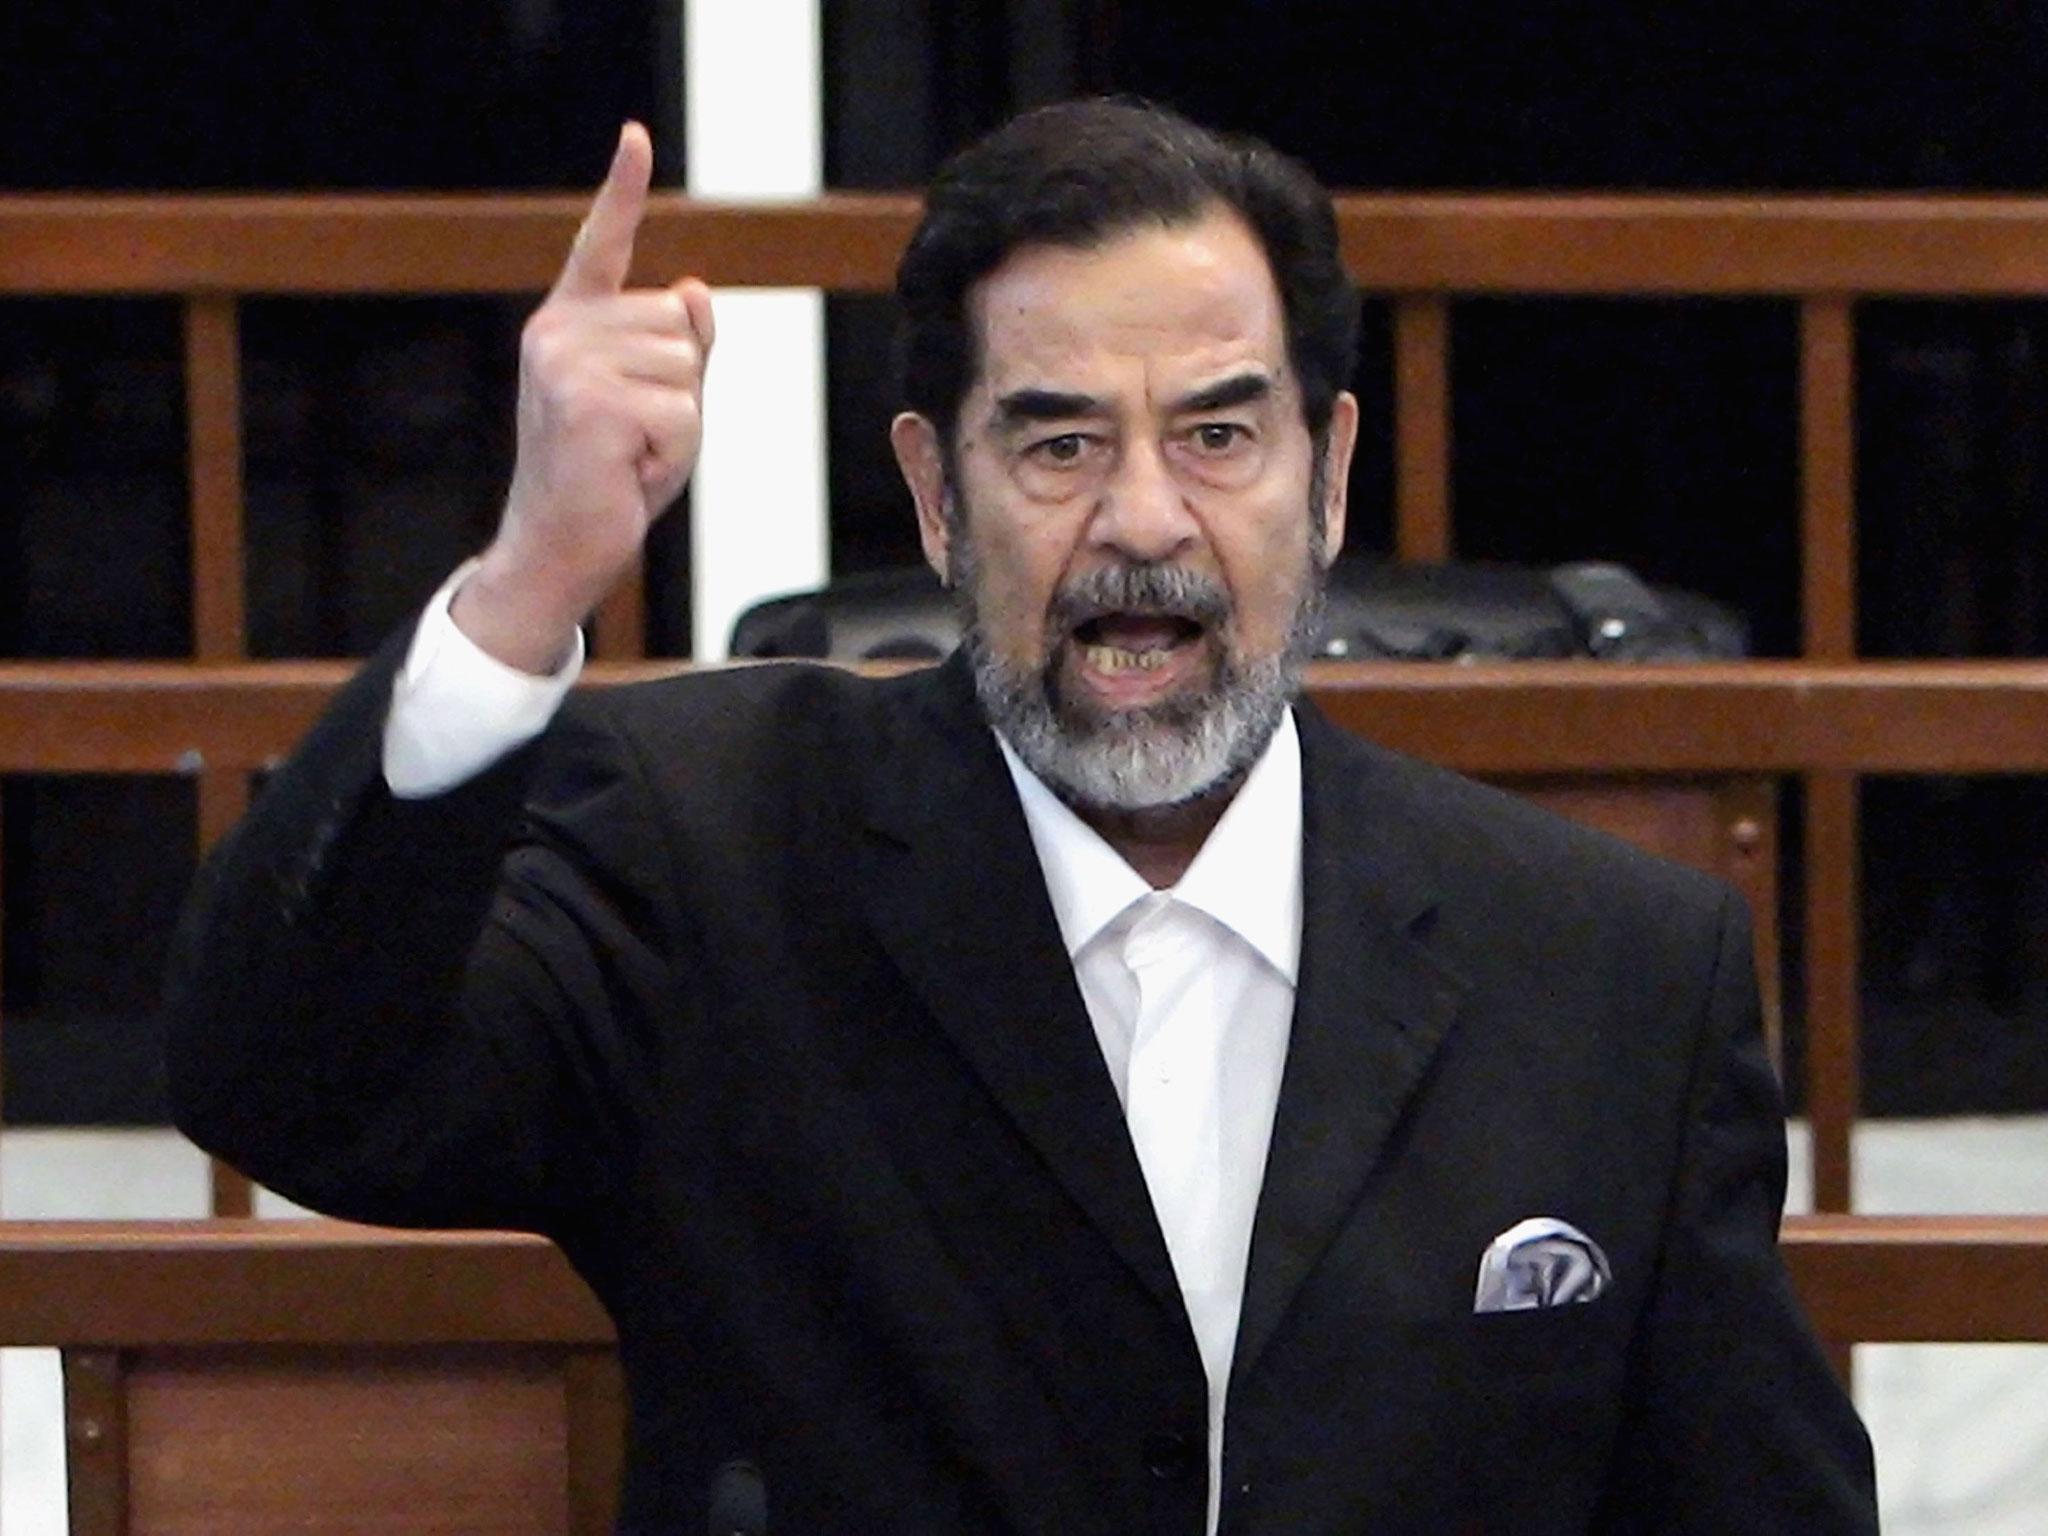 Saddam Hussein as he is found guilty in 2006 Getty